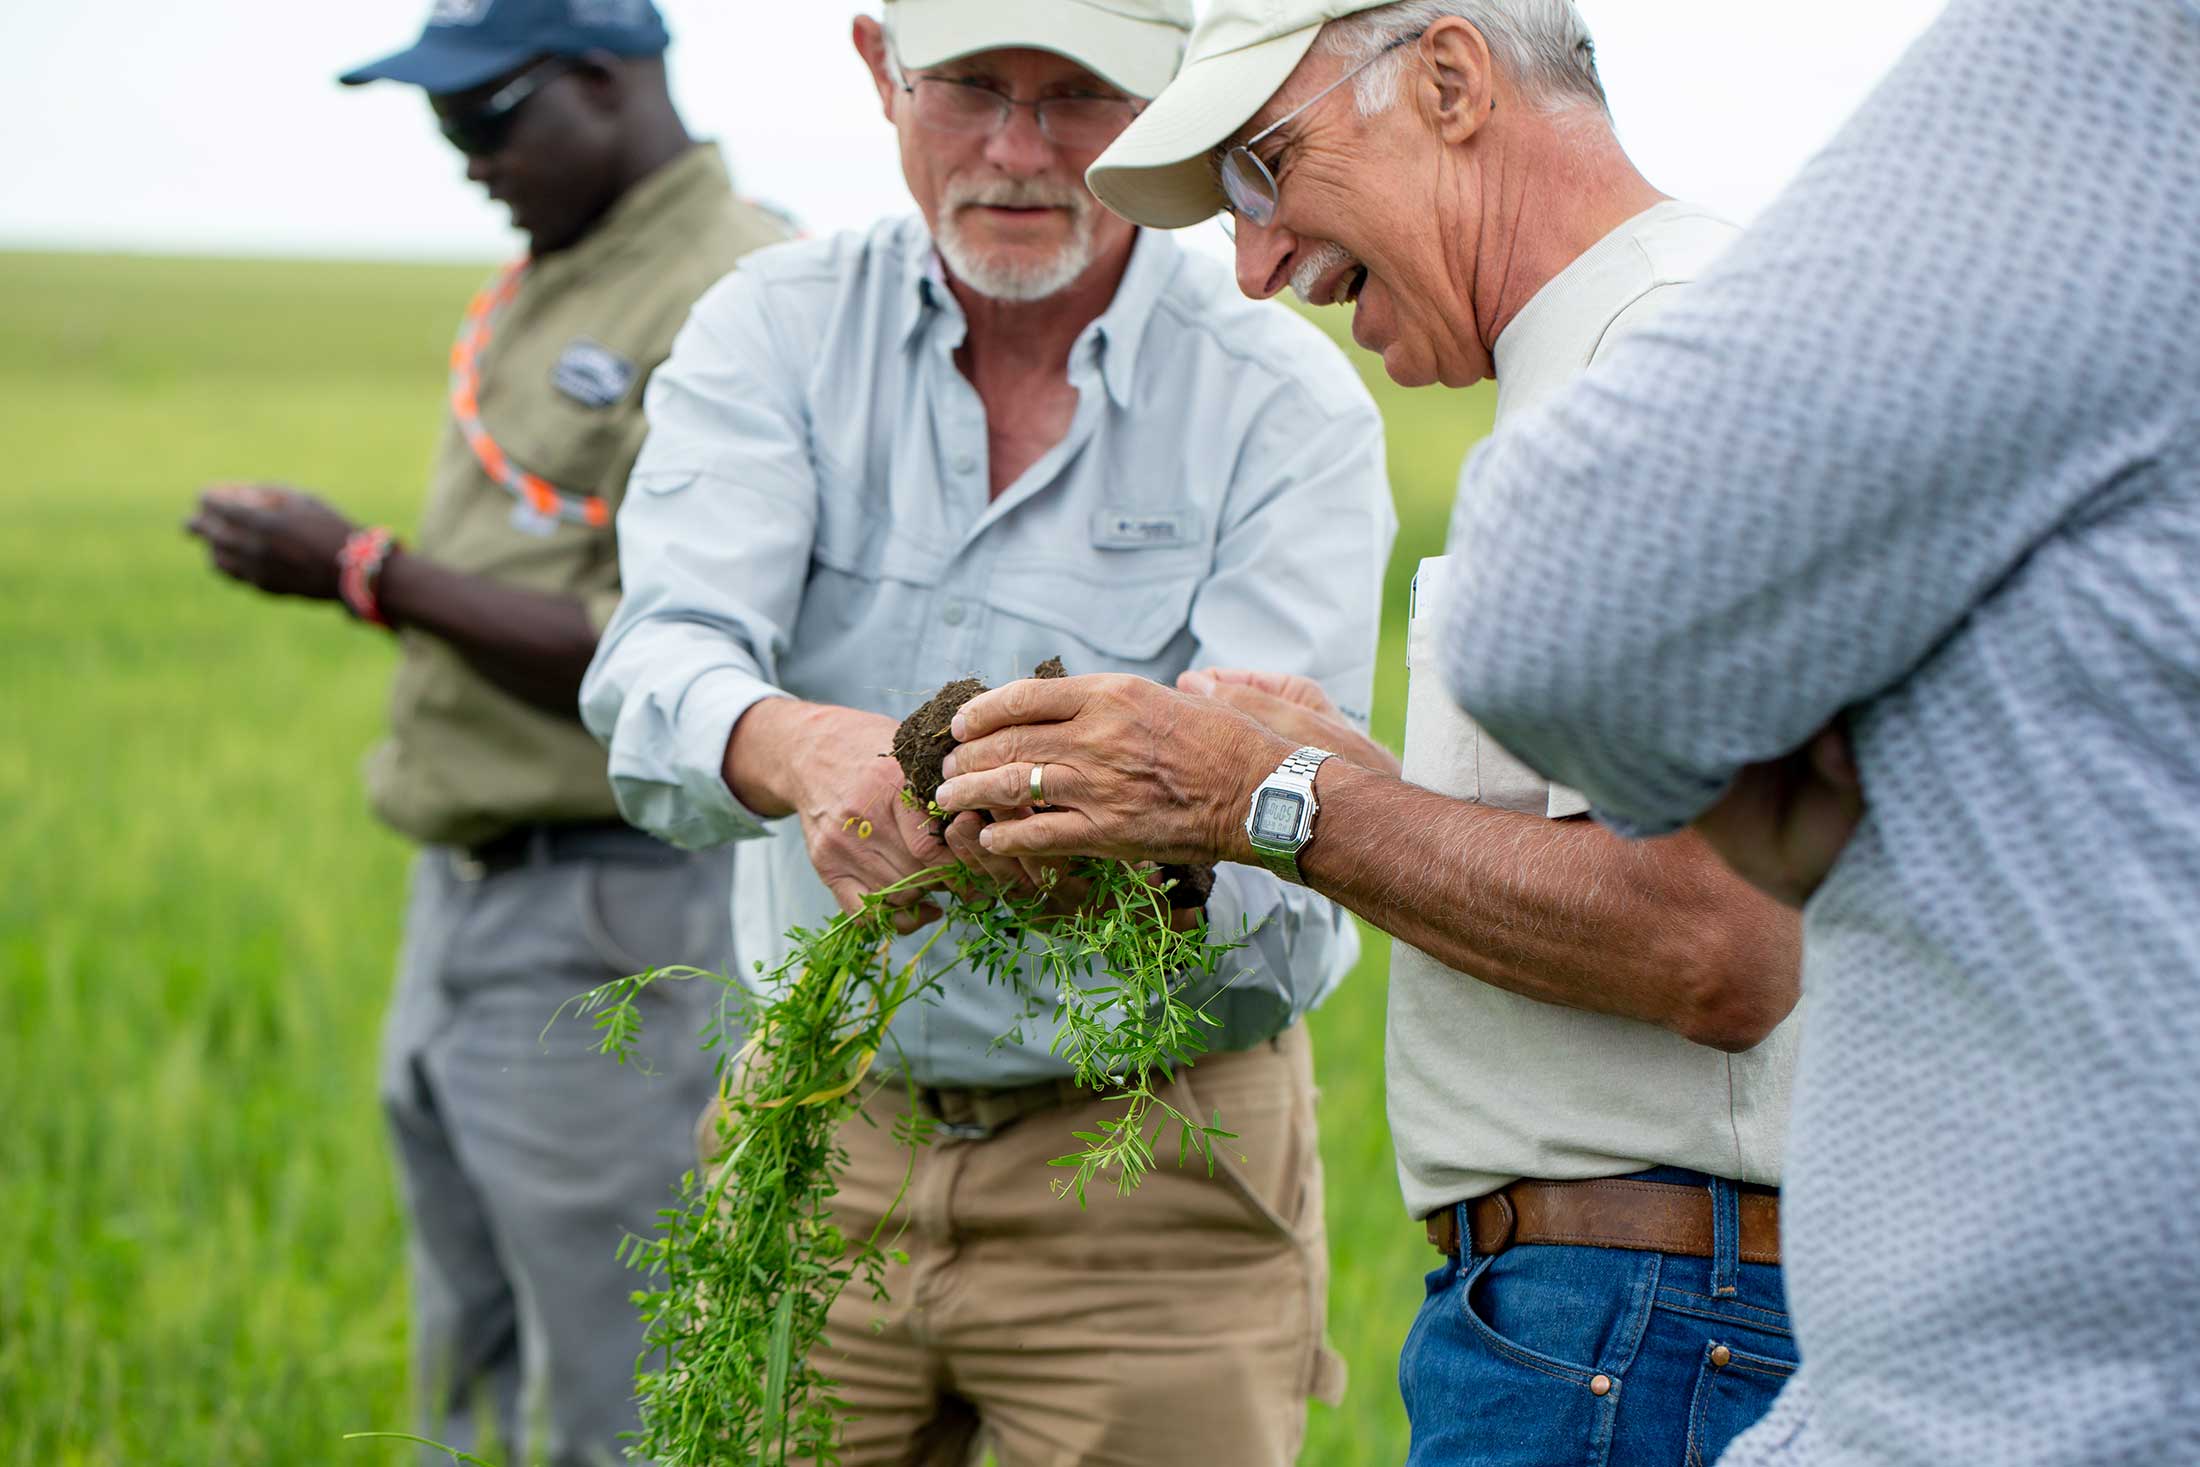 A group of farmers gather in a large field, looking at the roots of a lentil plant that one is holding